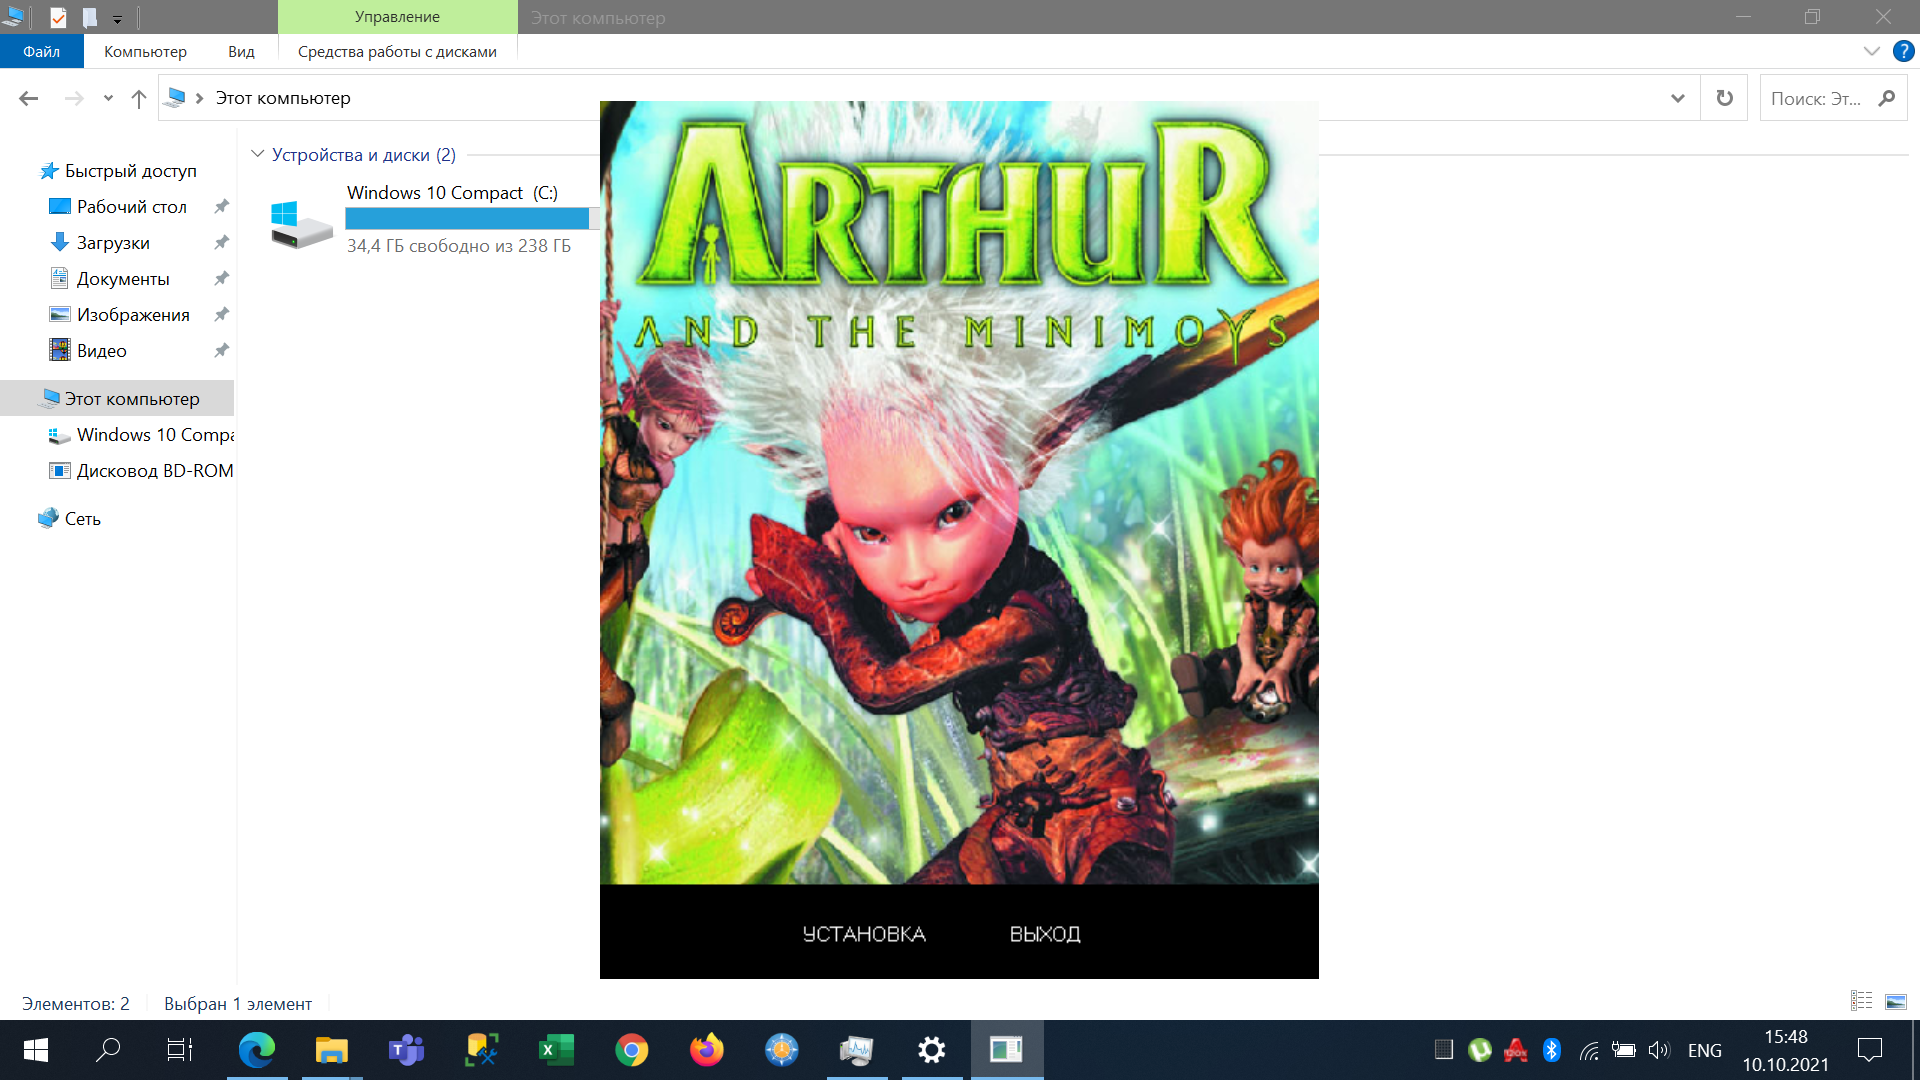 Arthur and the Invisibles (PC) (Russian bootleg by Медиа-Лайн) : Atari :  Free Download, Borrow, and Streaming : Internet Archive